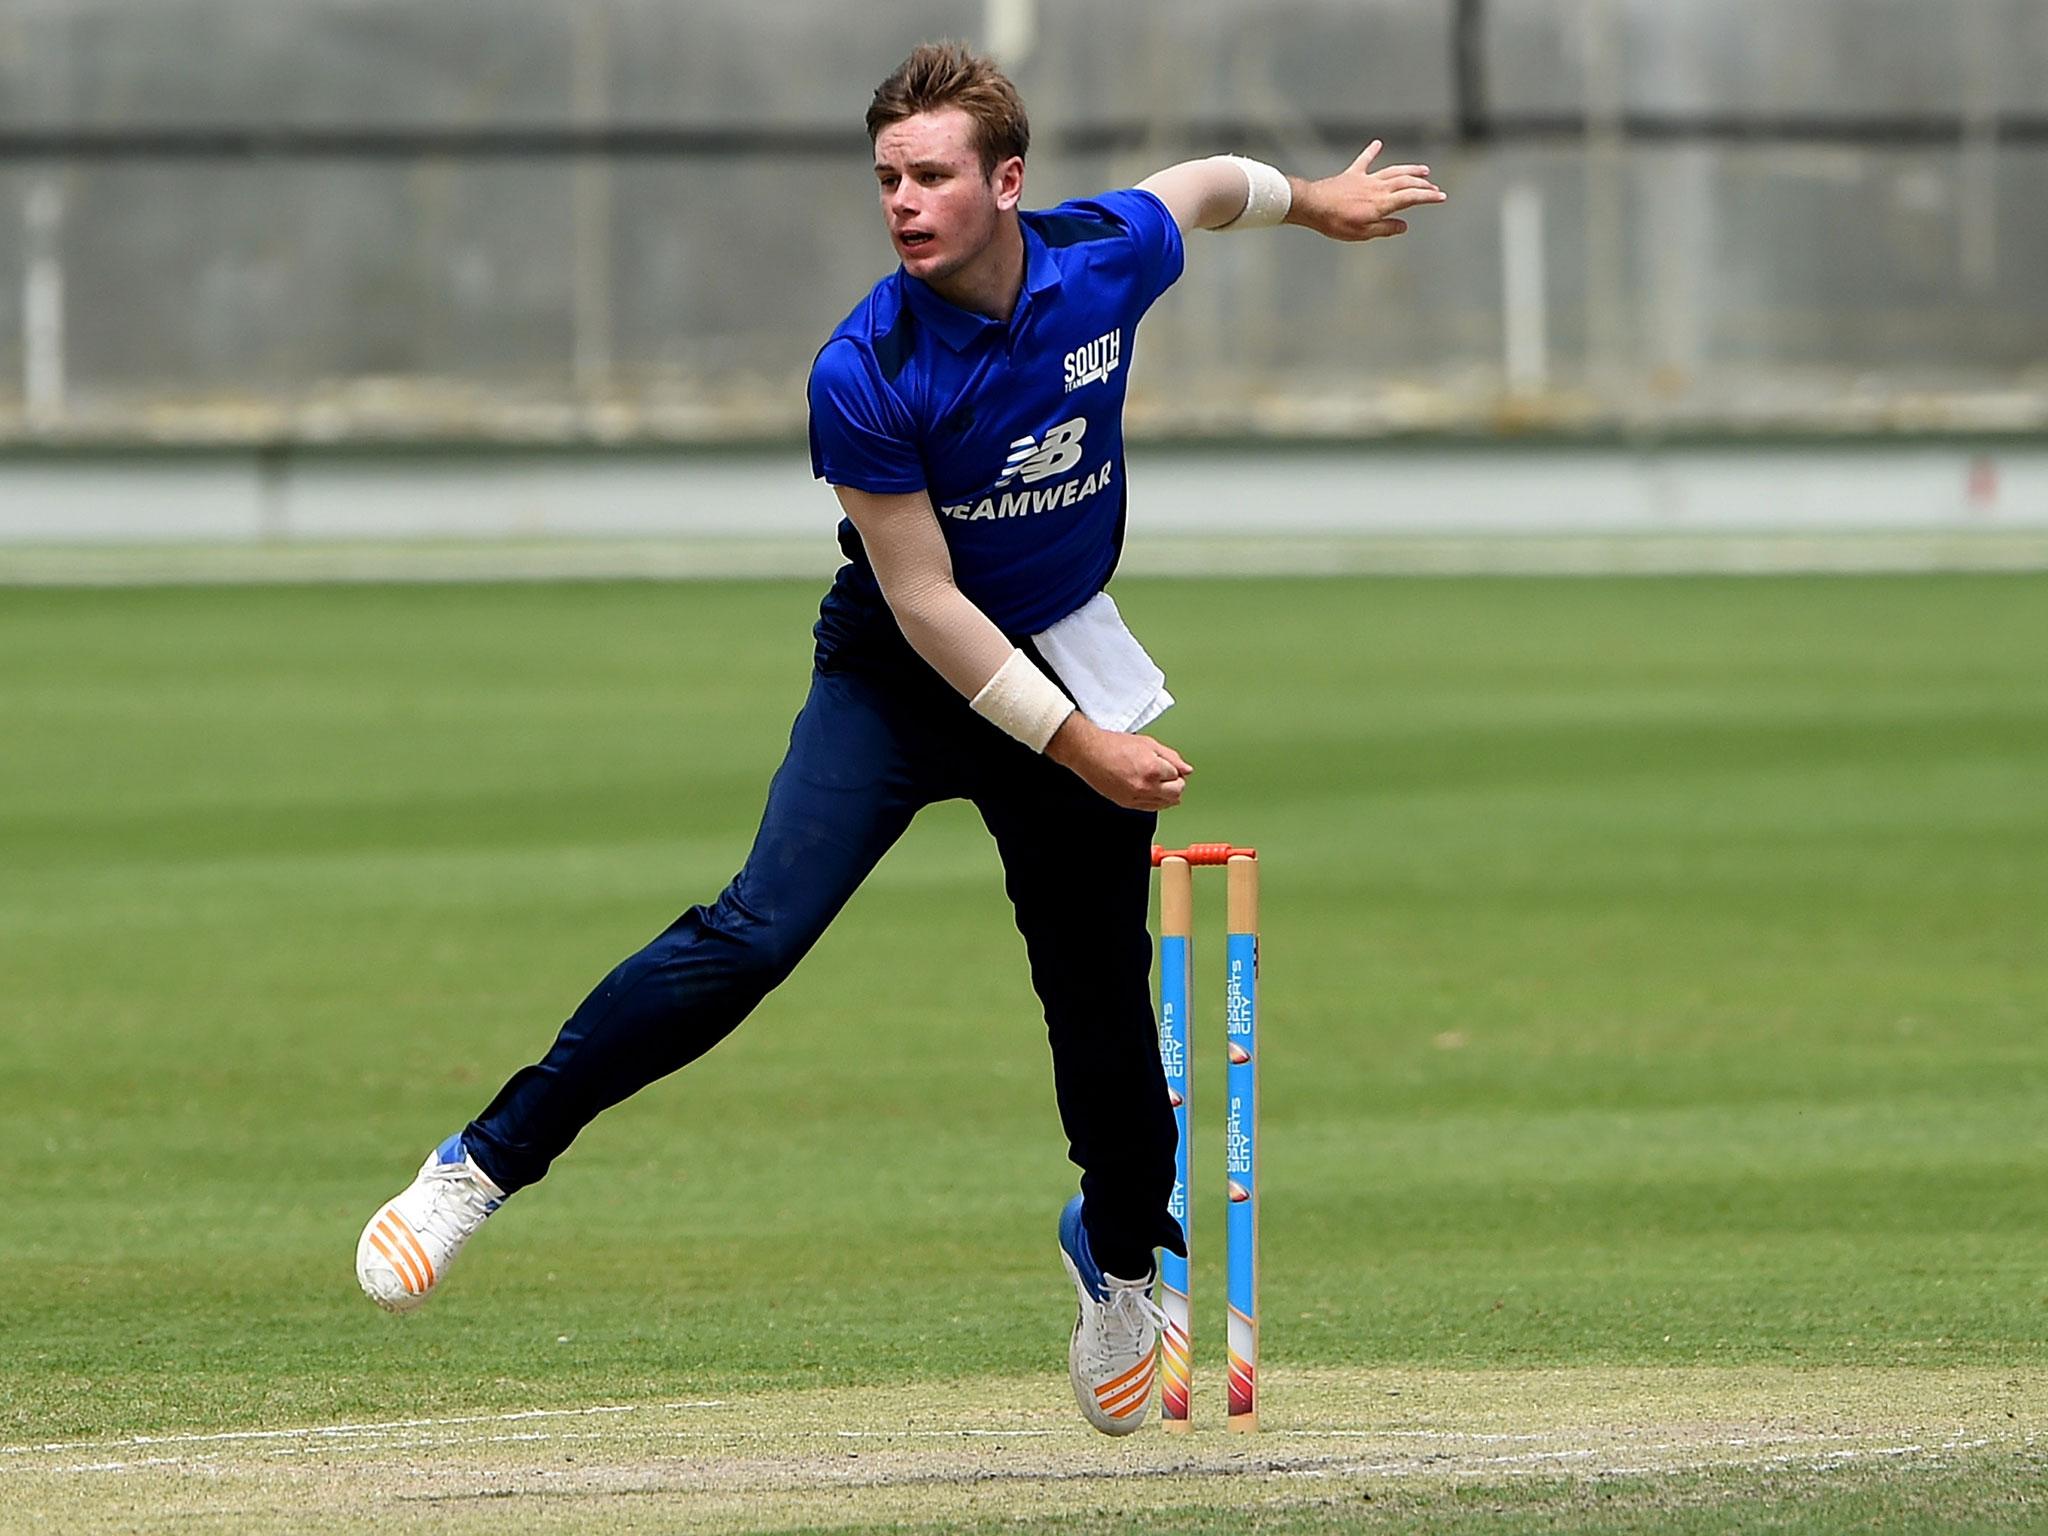 Mason Crane in action for The South during the recent North vs South series